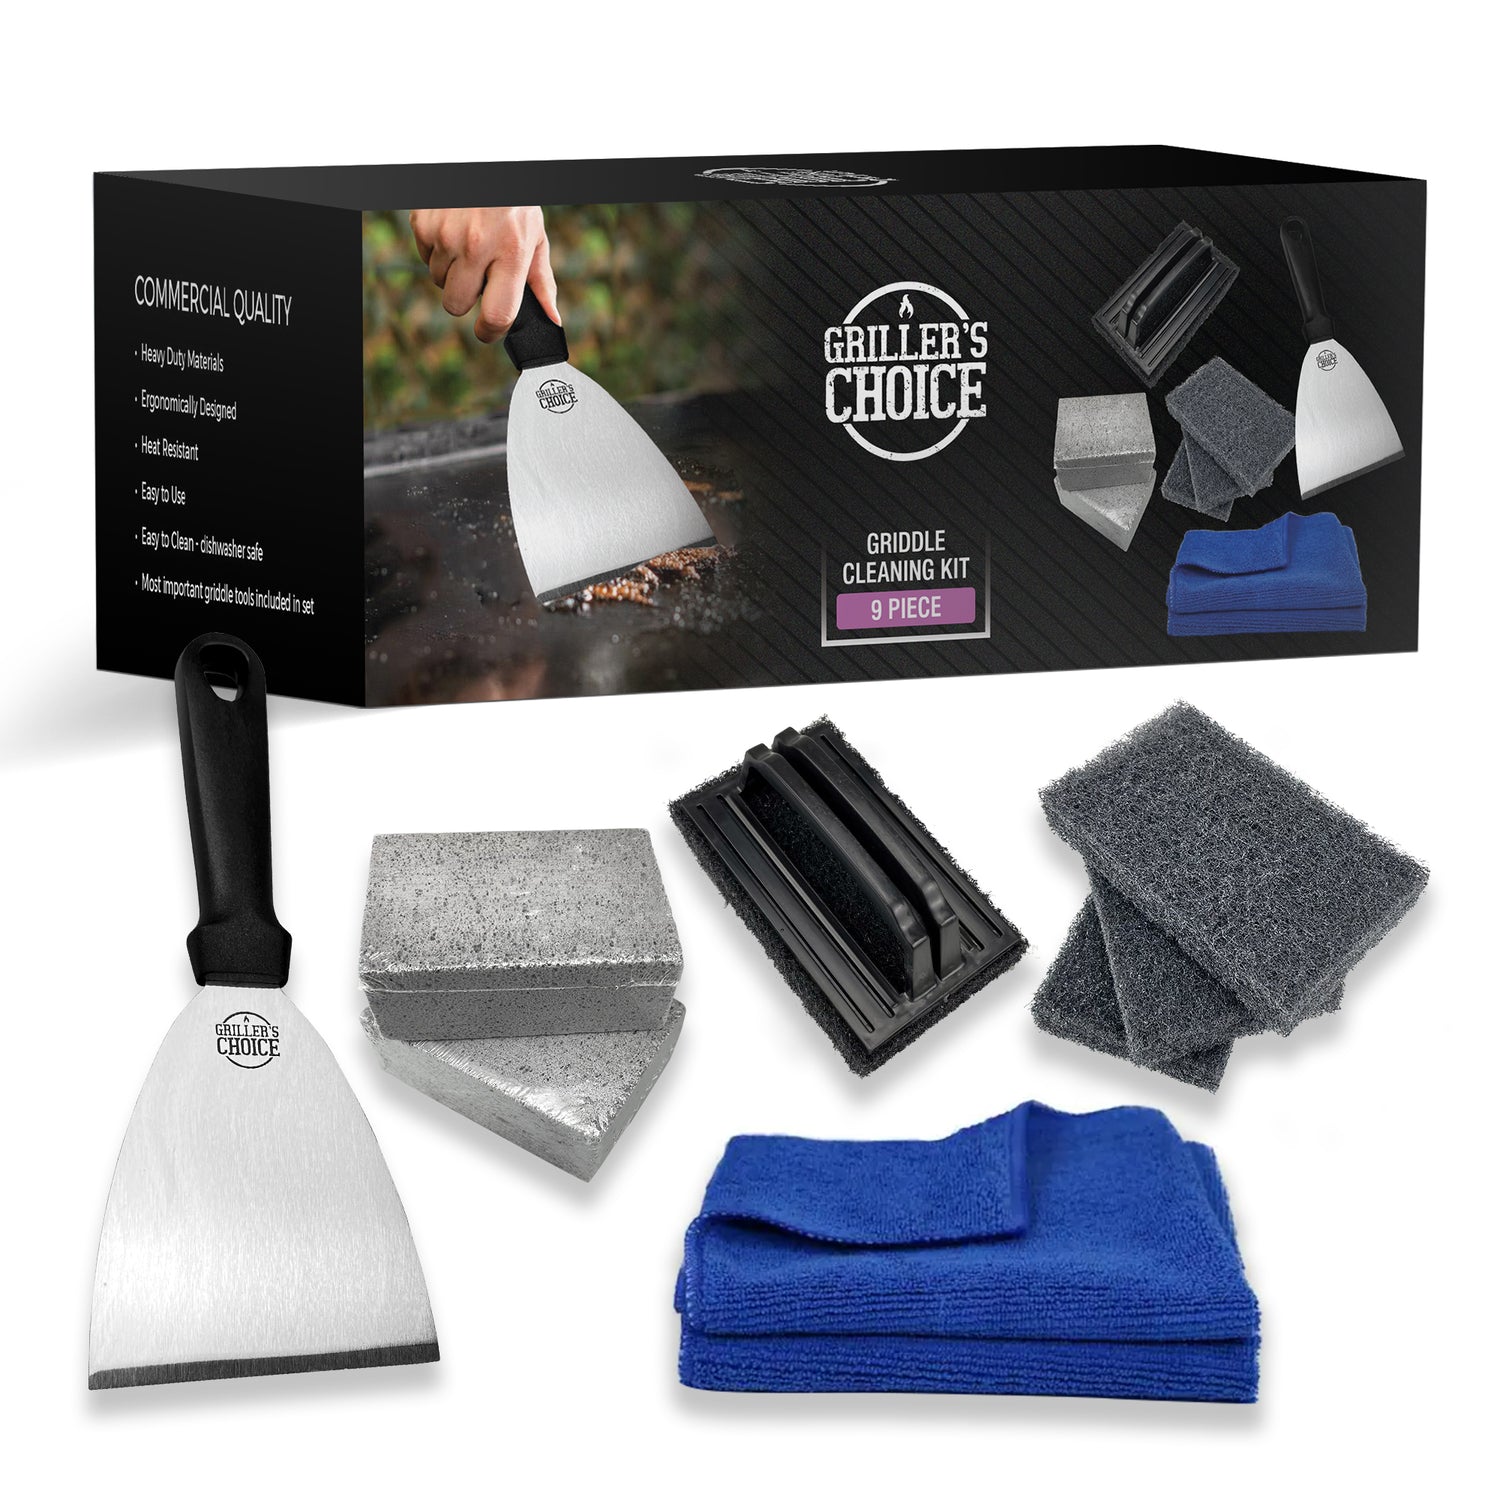 Griddle Cleaning Kit - Flat Top Grill Cleaner, stainless steel scraper